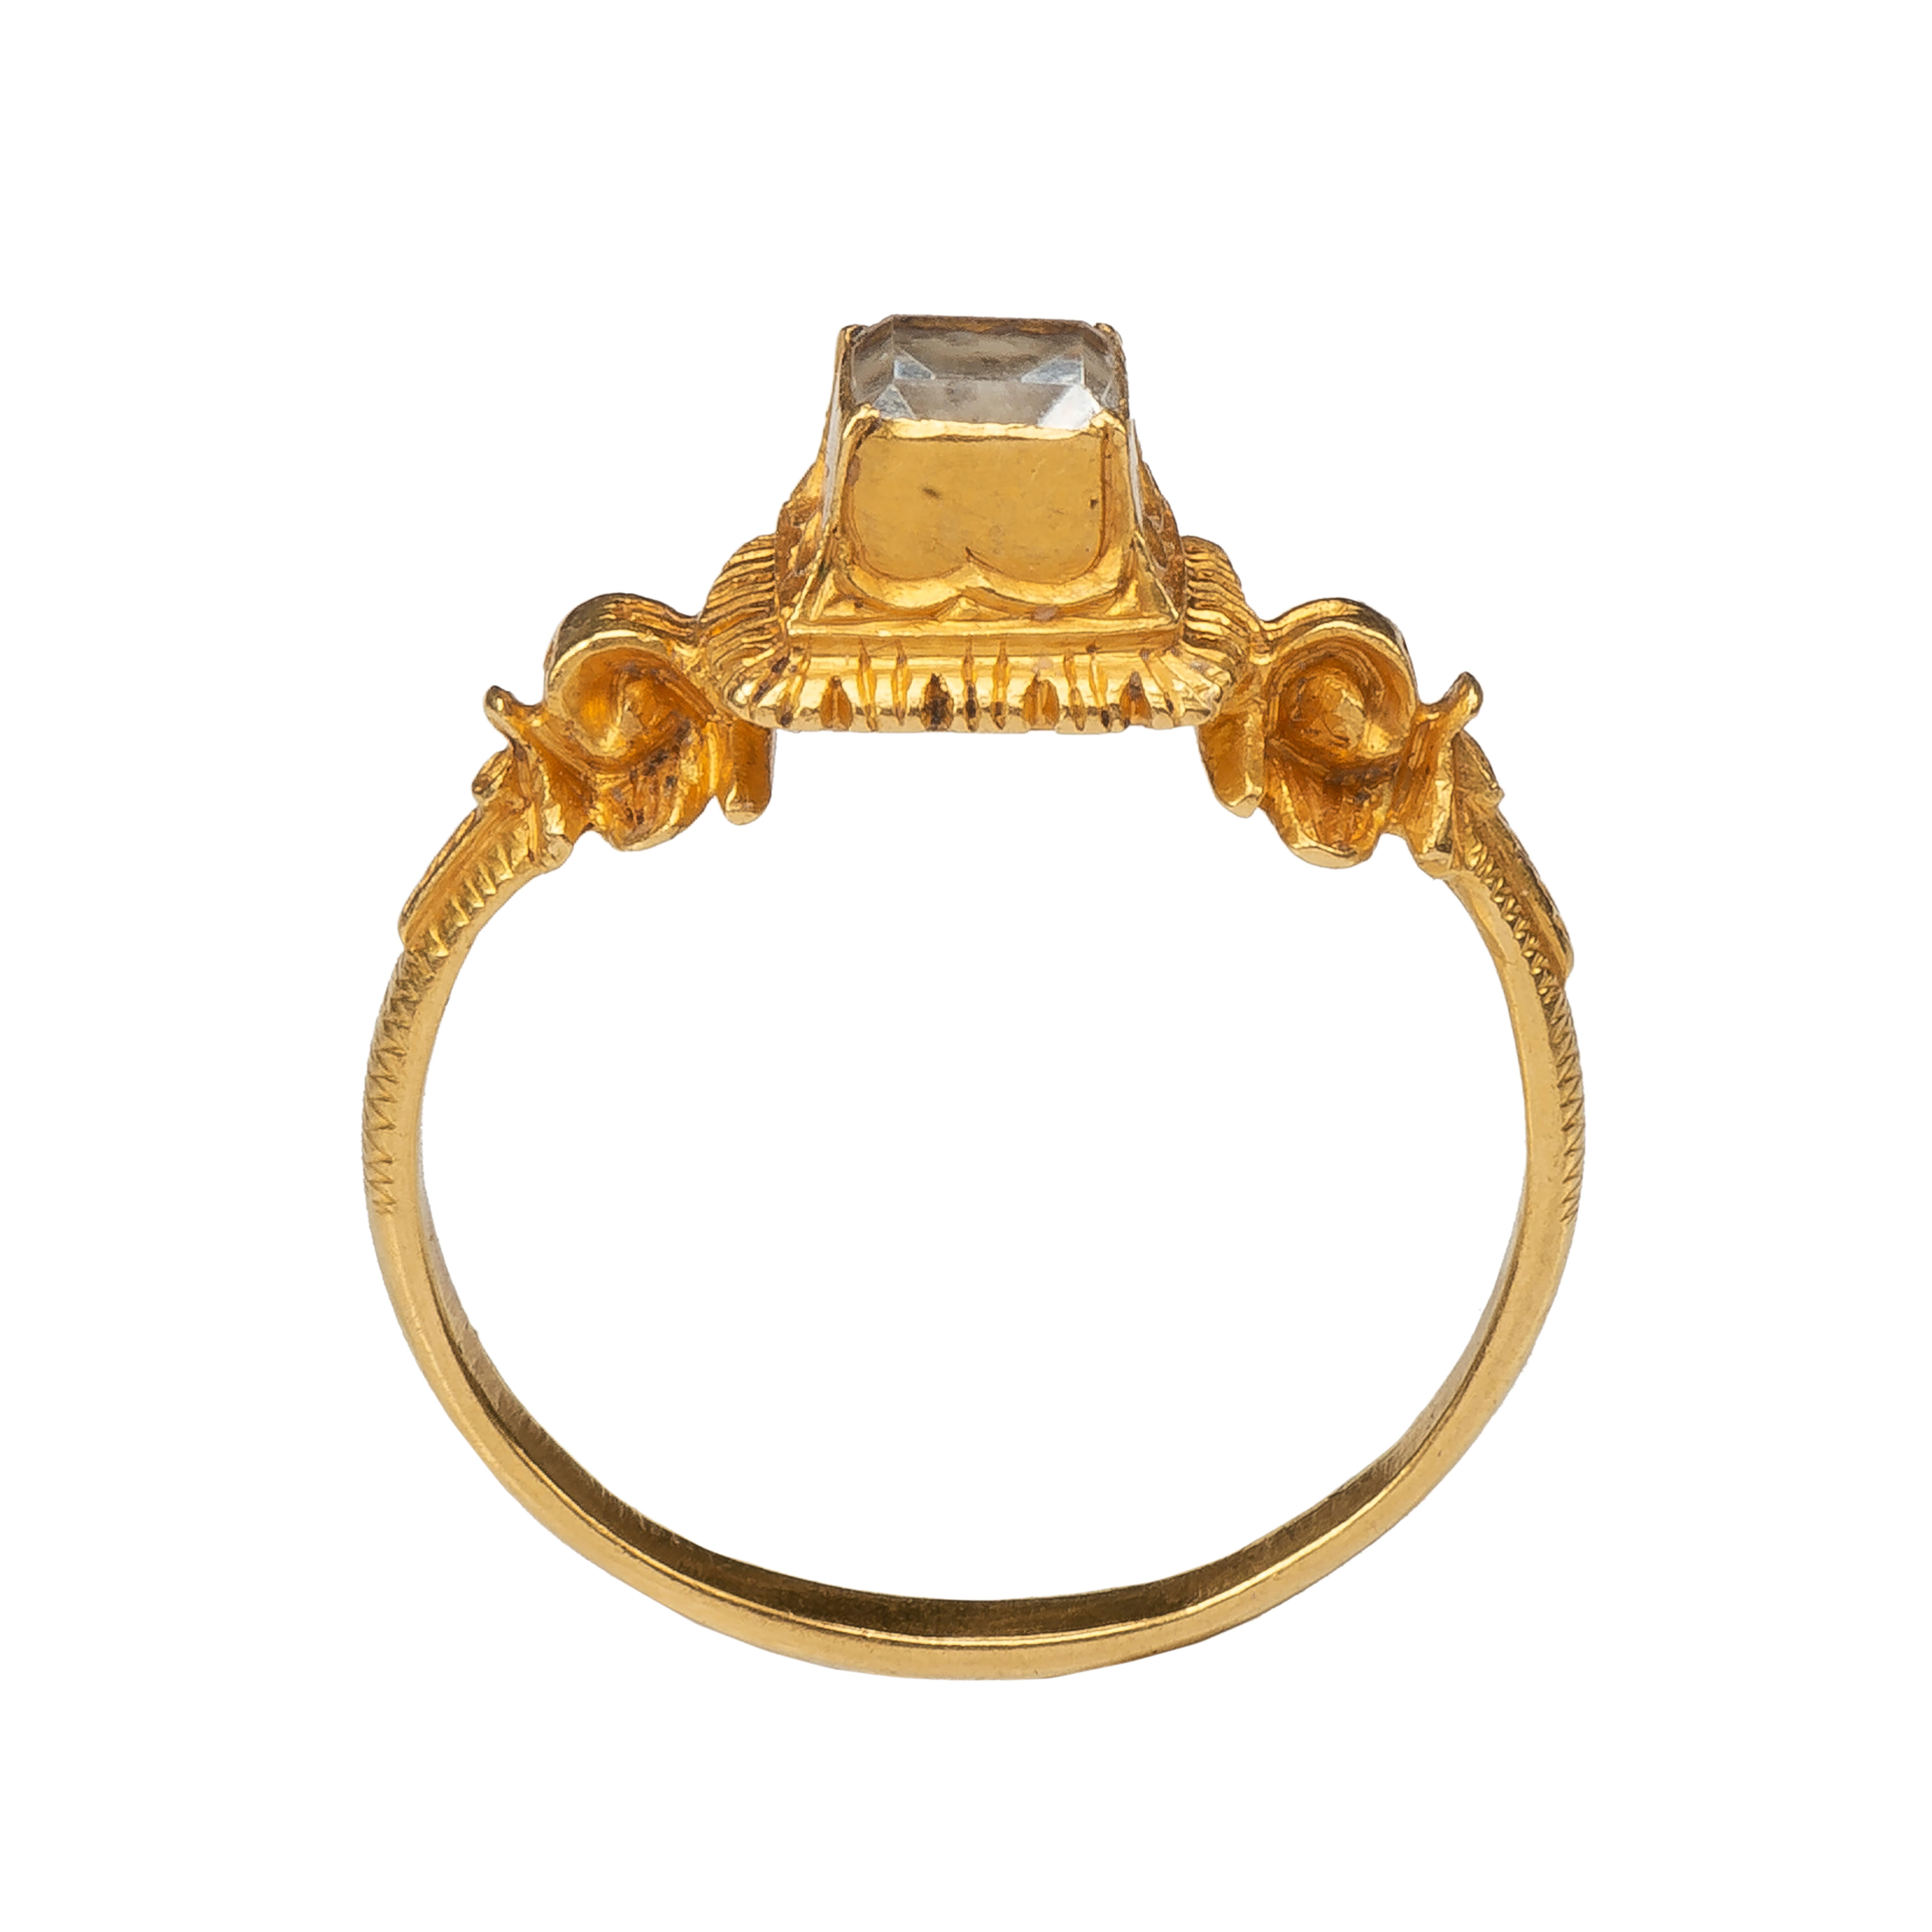 Renaissance Marriage Ring
Western Europe, late 16th century
Gold, rock crystal, traces of white and black enamel
Weight 4.09 g; circumference: 54.82 mm.; US size US 7 1/4; UK size 0 1/2

The gold hoop with D-section widens towards shoulders that end